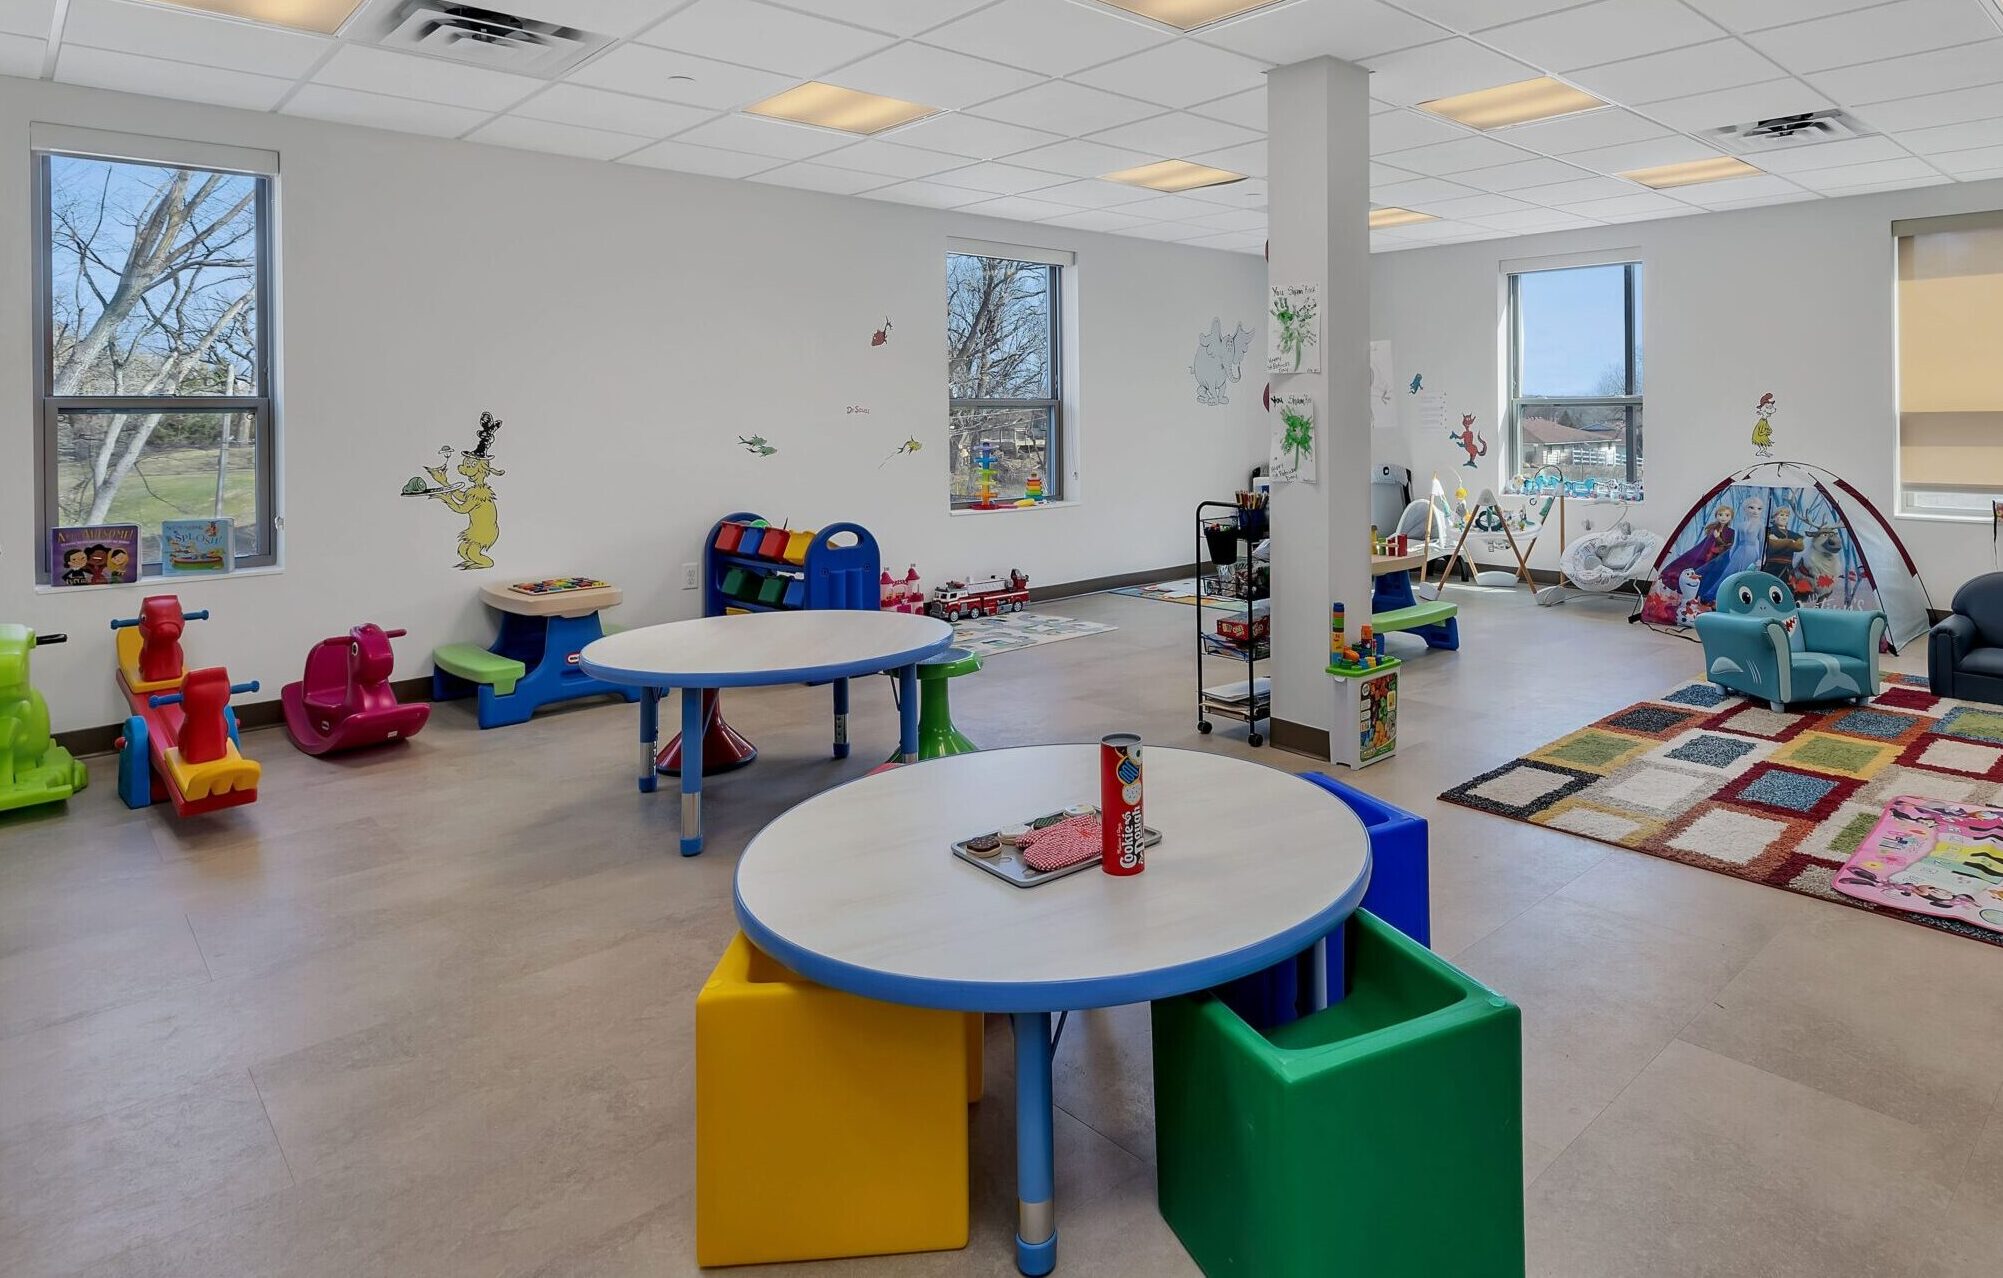 Children's tables, chairs and toys in playroom